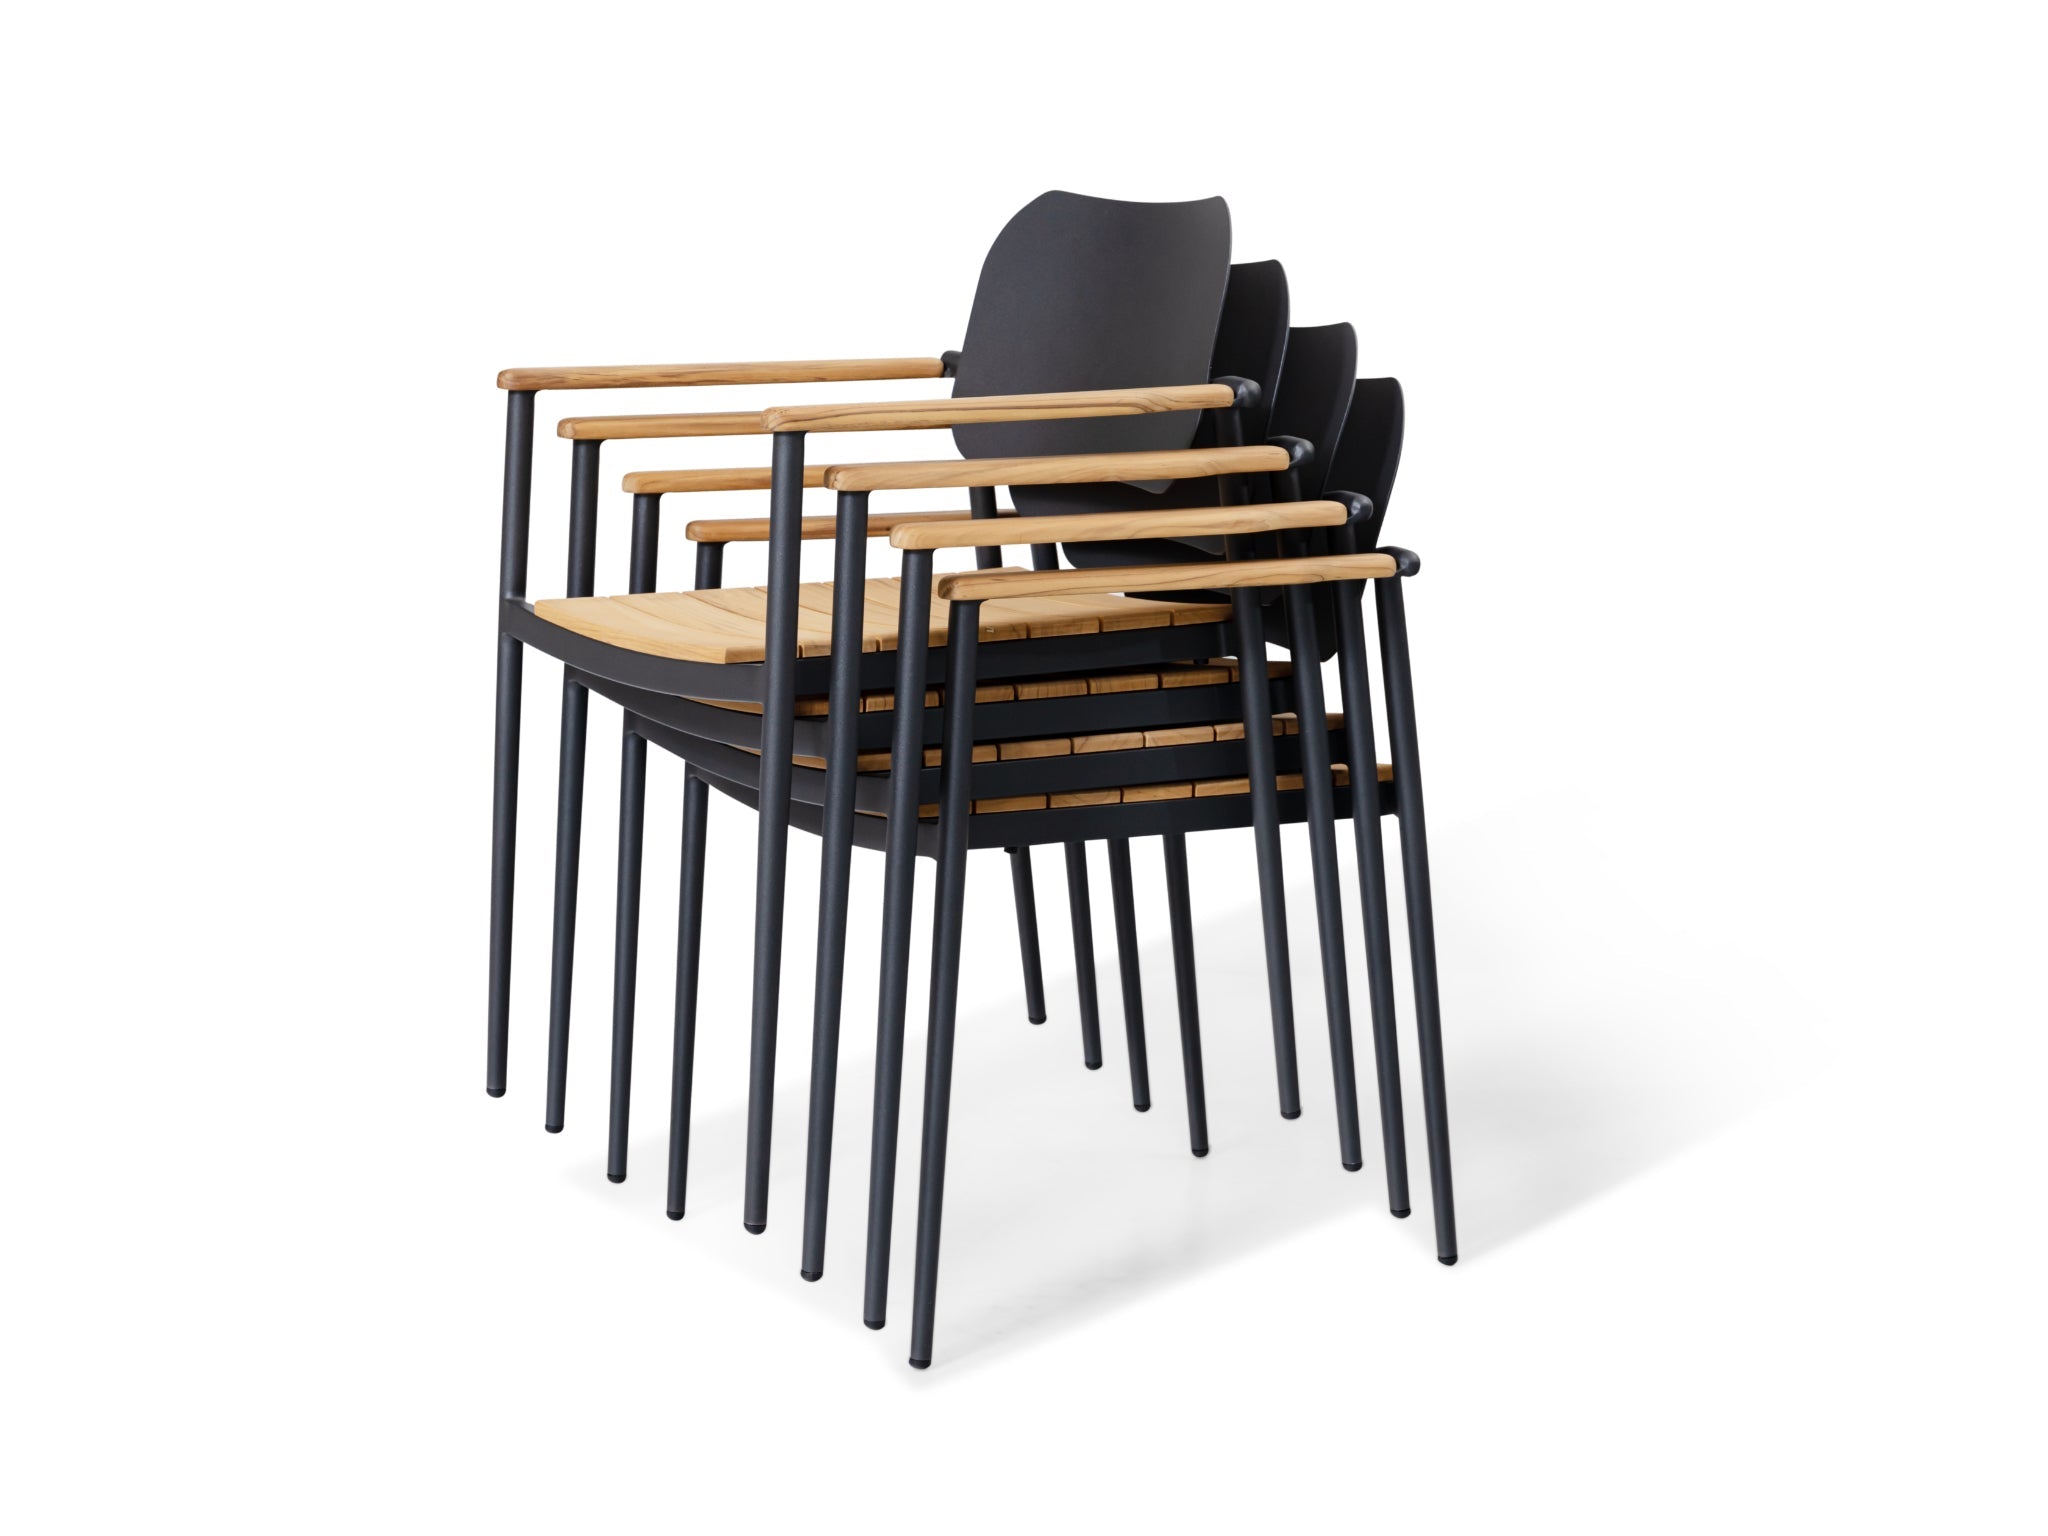 SIMPO by Sunlongarden Pier Dining Chair